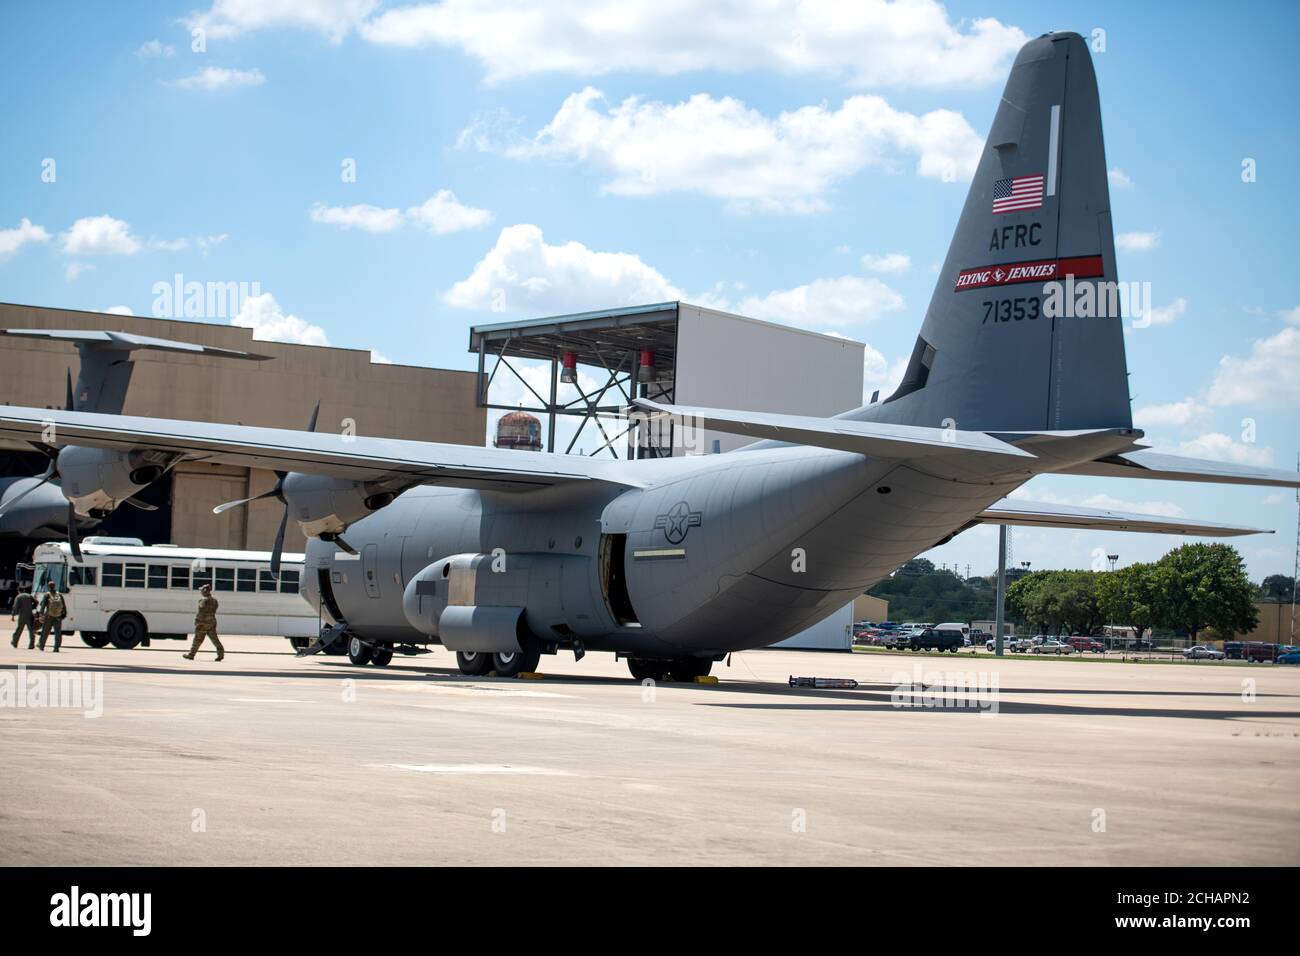 U.S. Air Force C-130Js from the 403rd Wing, Keesler Air Force Base, Miss., arrive Sept. 13, 2020, at Kelly Airfield, Texas. The C-130Js were moved in preparation for Tropical Storm Sally. The aircrafts are from the 53rd Weather Reconnaissance Squadron and the 815th Airlift Squadron. (U.S. Air Force photo by Sarayuth Pinthong) Stock Photo